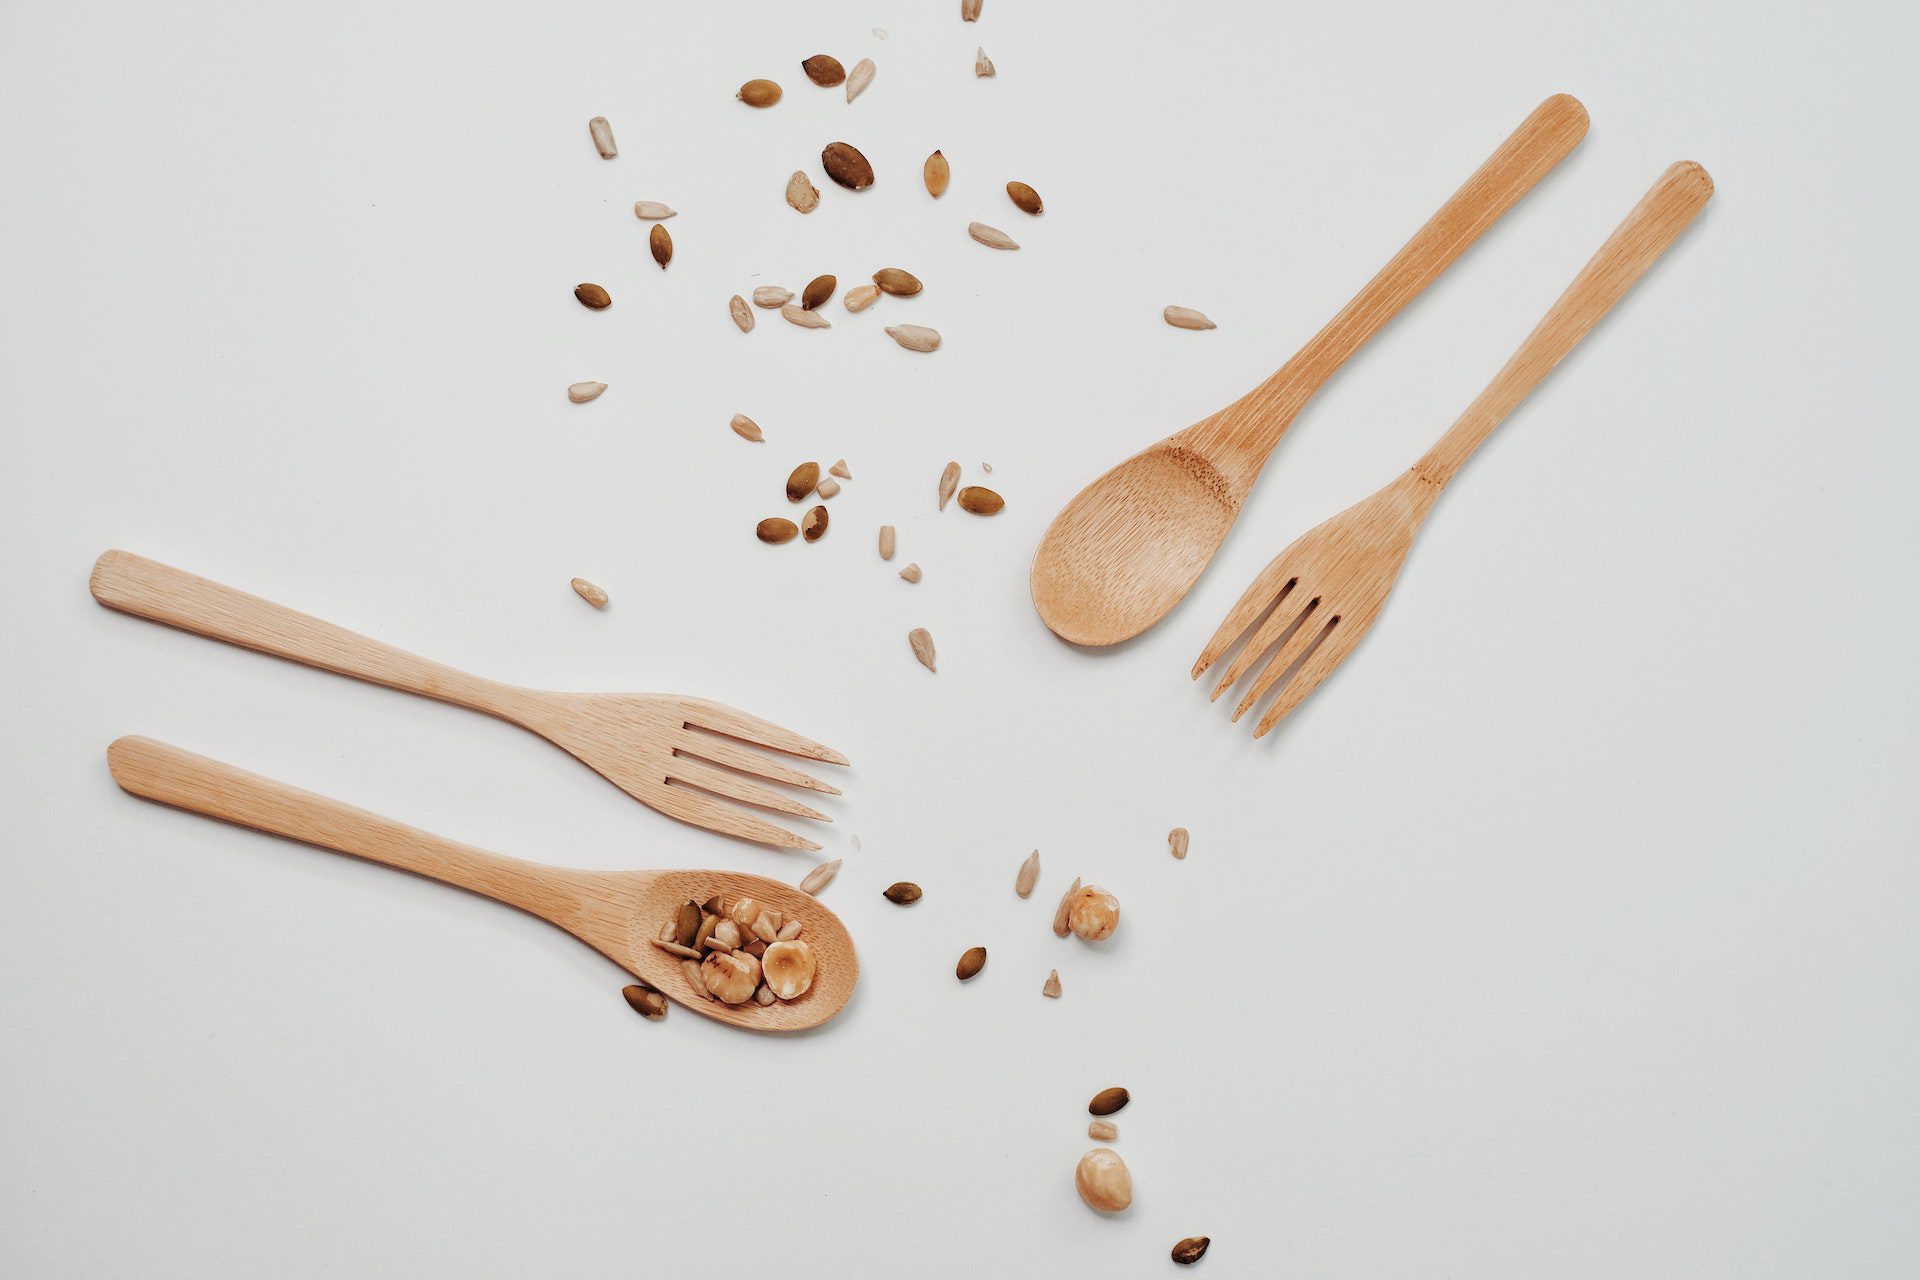 Photo by Vie Studio: https://www.pexels.com/photo/wooden-utensils-on-a-white-surface-4856846/